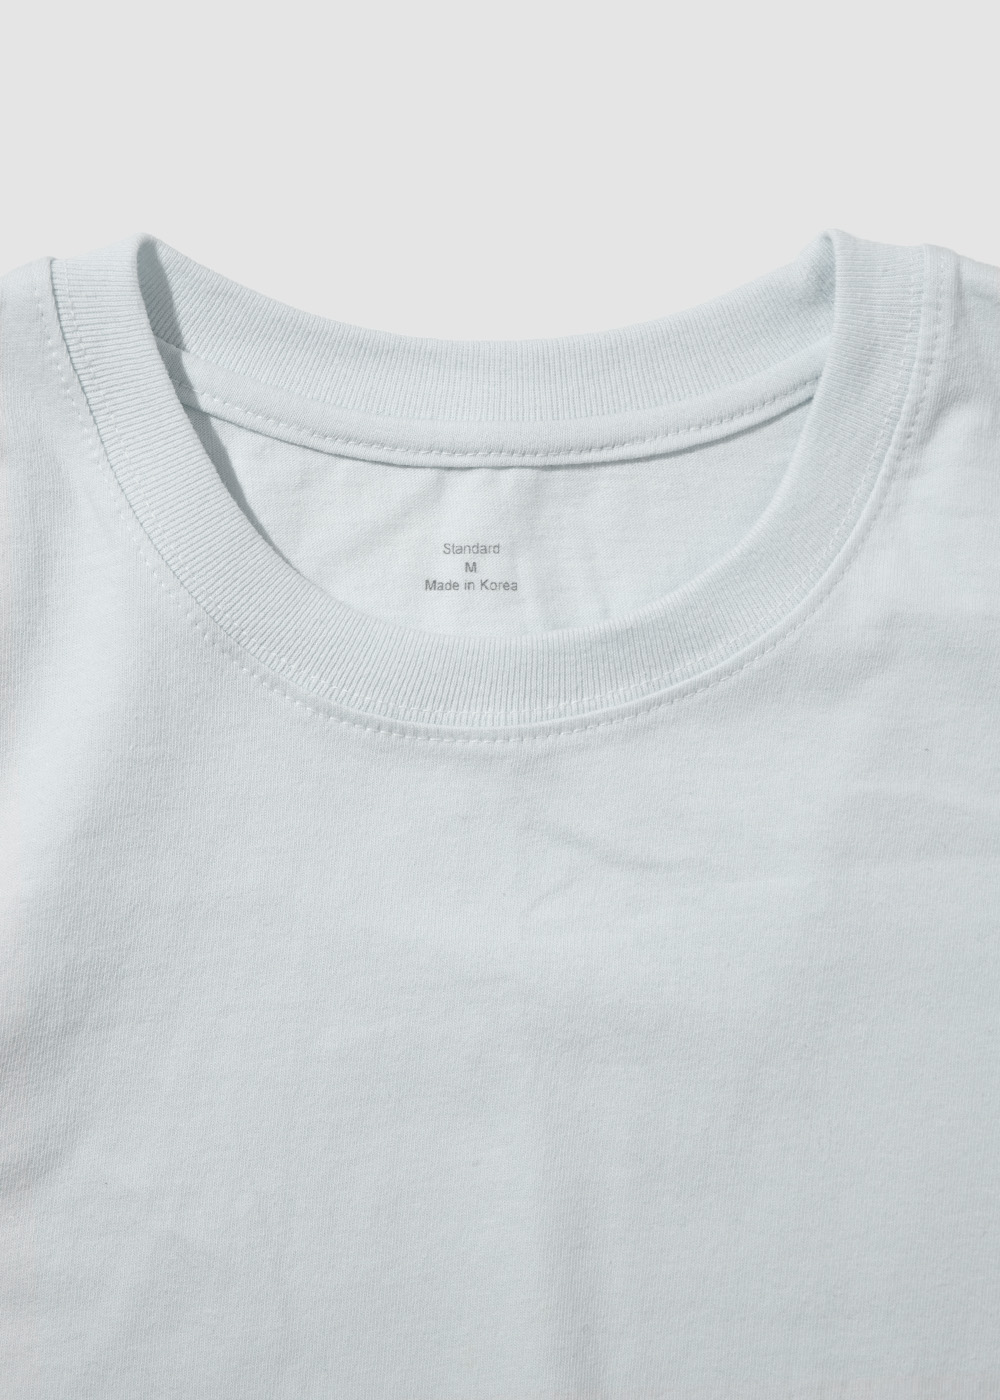 D. Tumbled Carded Cotton 100% 20/1 Single T-shirt _ ice cotton